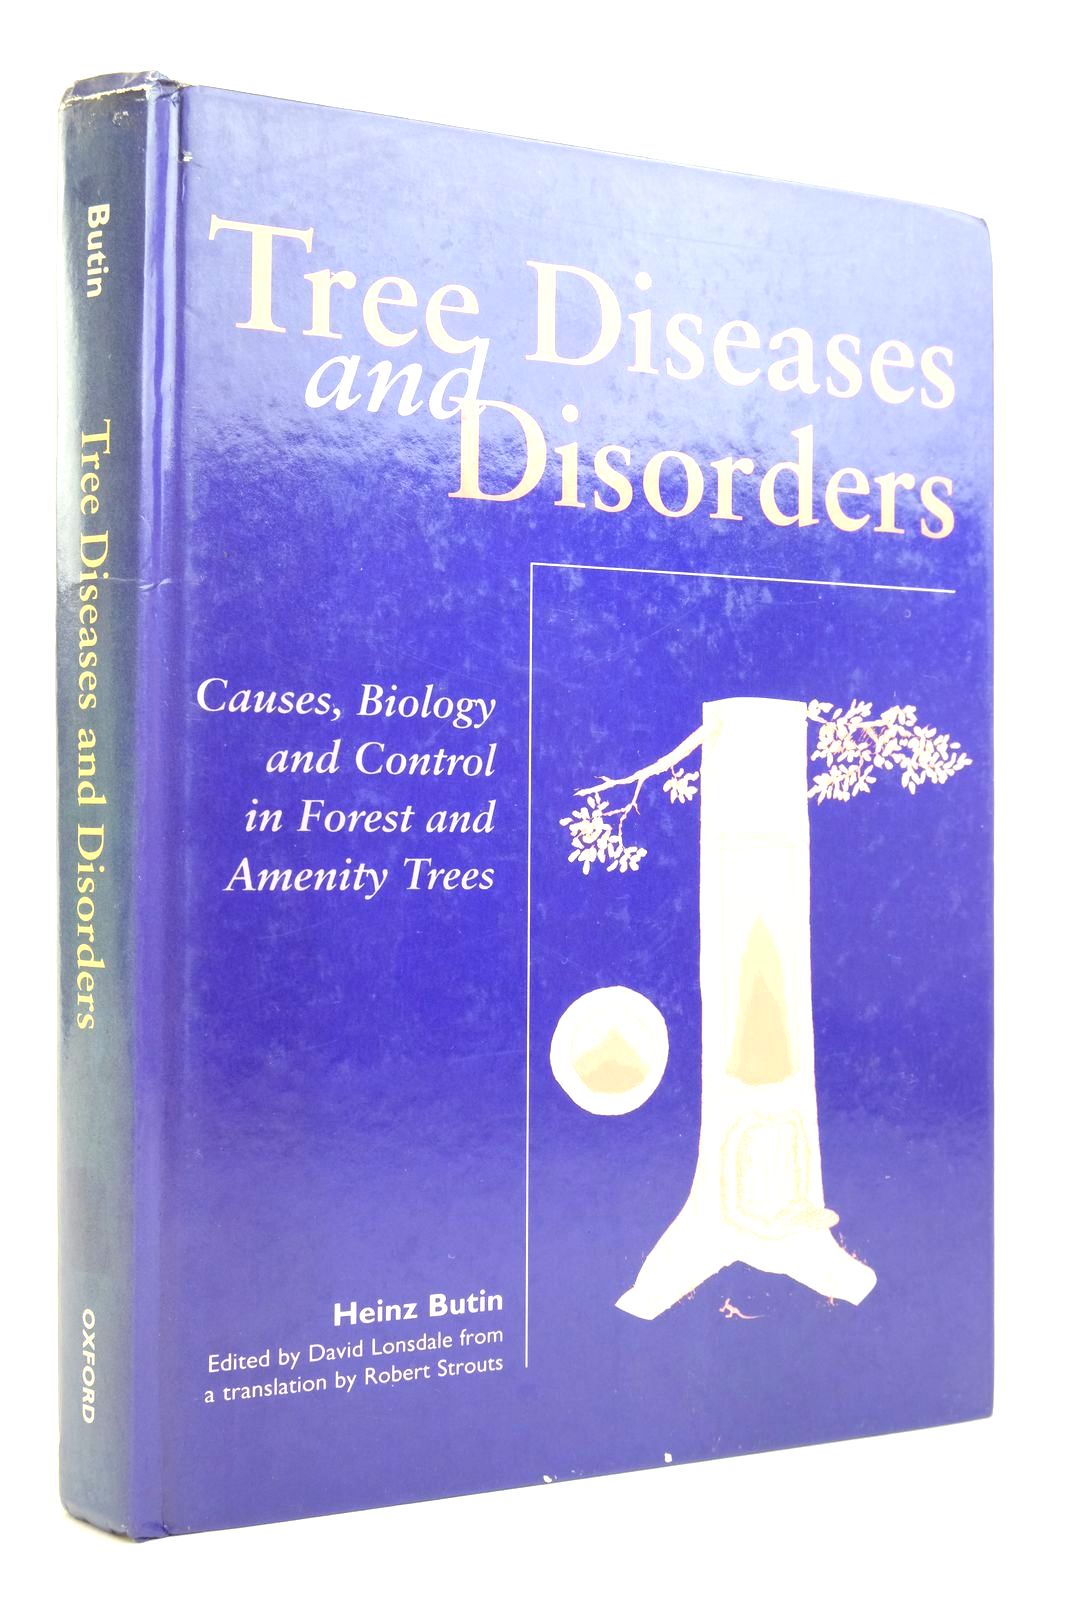 Photo of TREE DISEASES AND DISORDERS: CAUSES, BIOLOGY, AND CONTROL IN FOREST AND AMENITY TREES written by Butin, Heinz Lonsdale, David published by Oxford University Press (STOCK CODE: 2135351)  for sale by Stella & Rose's Books